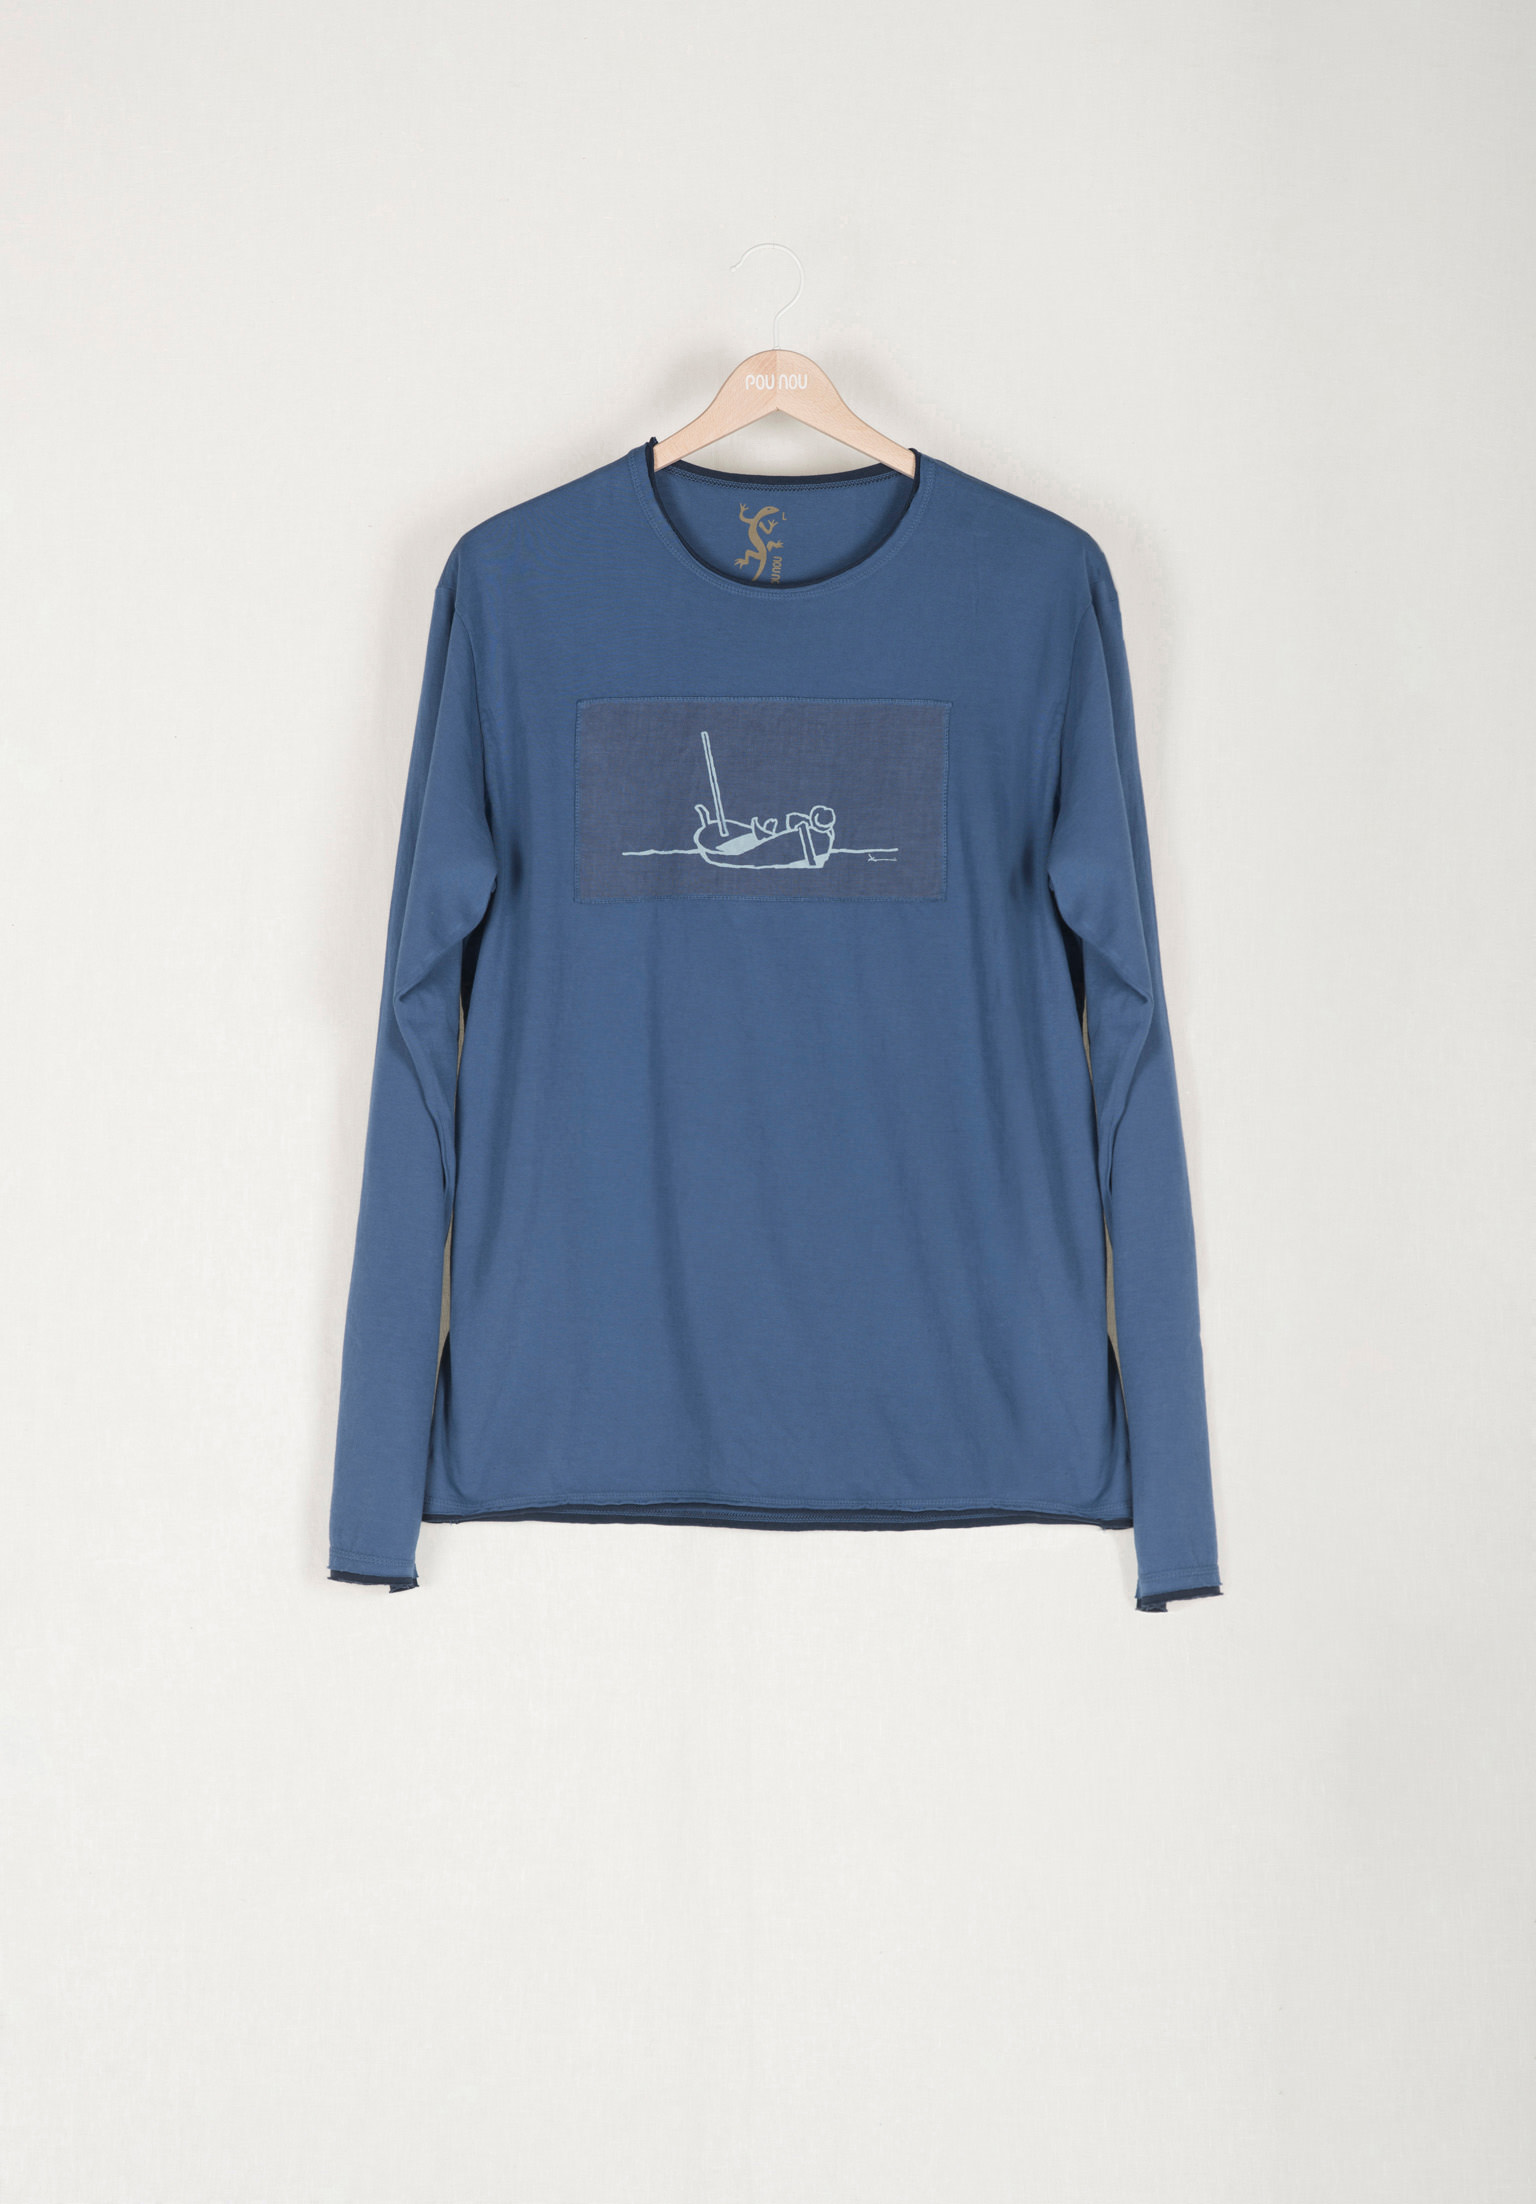 Long-sleeved t-shirt with horizontal patch resting